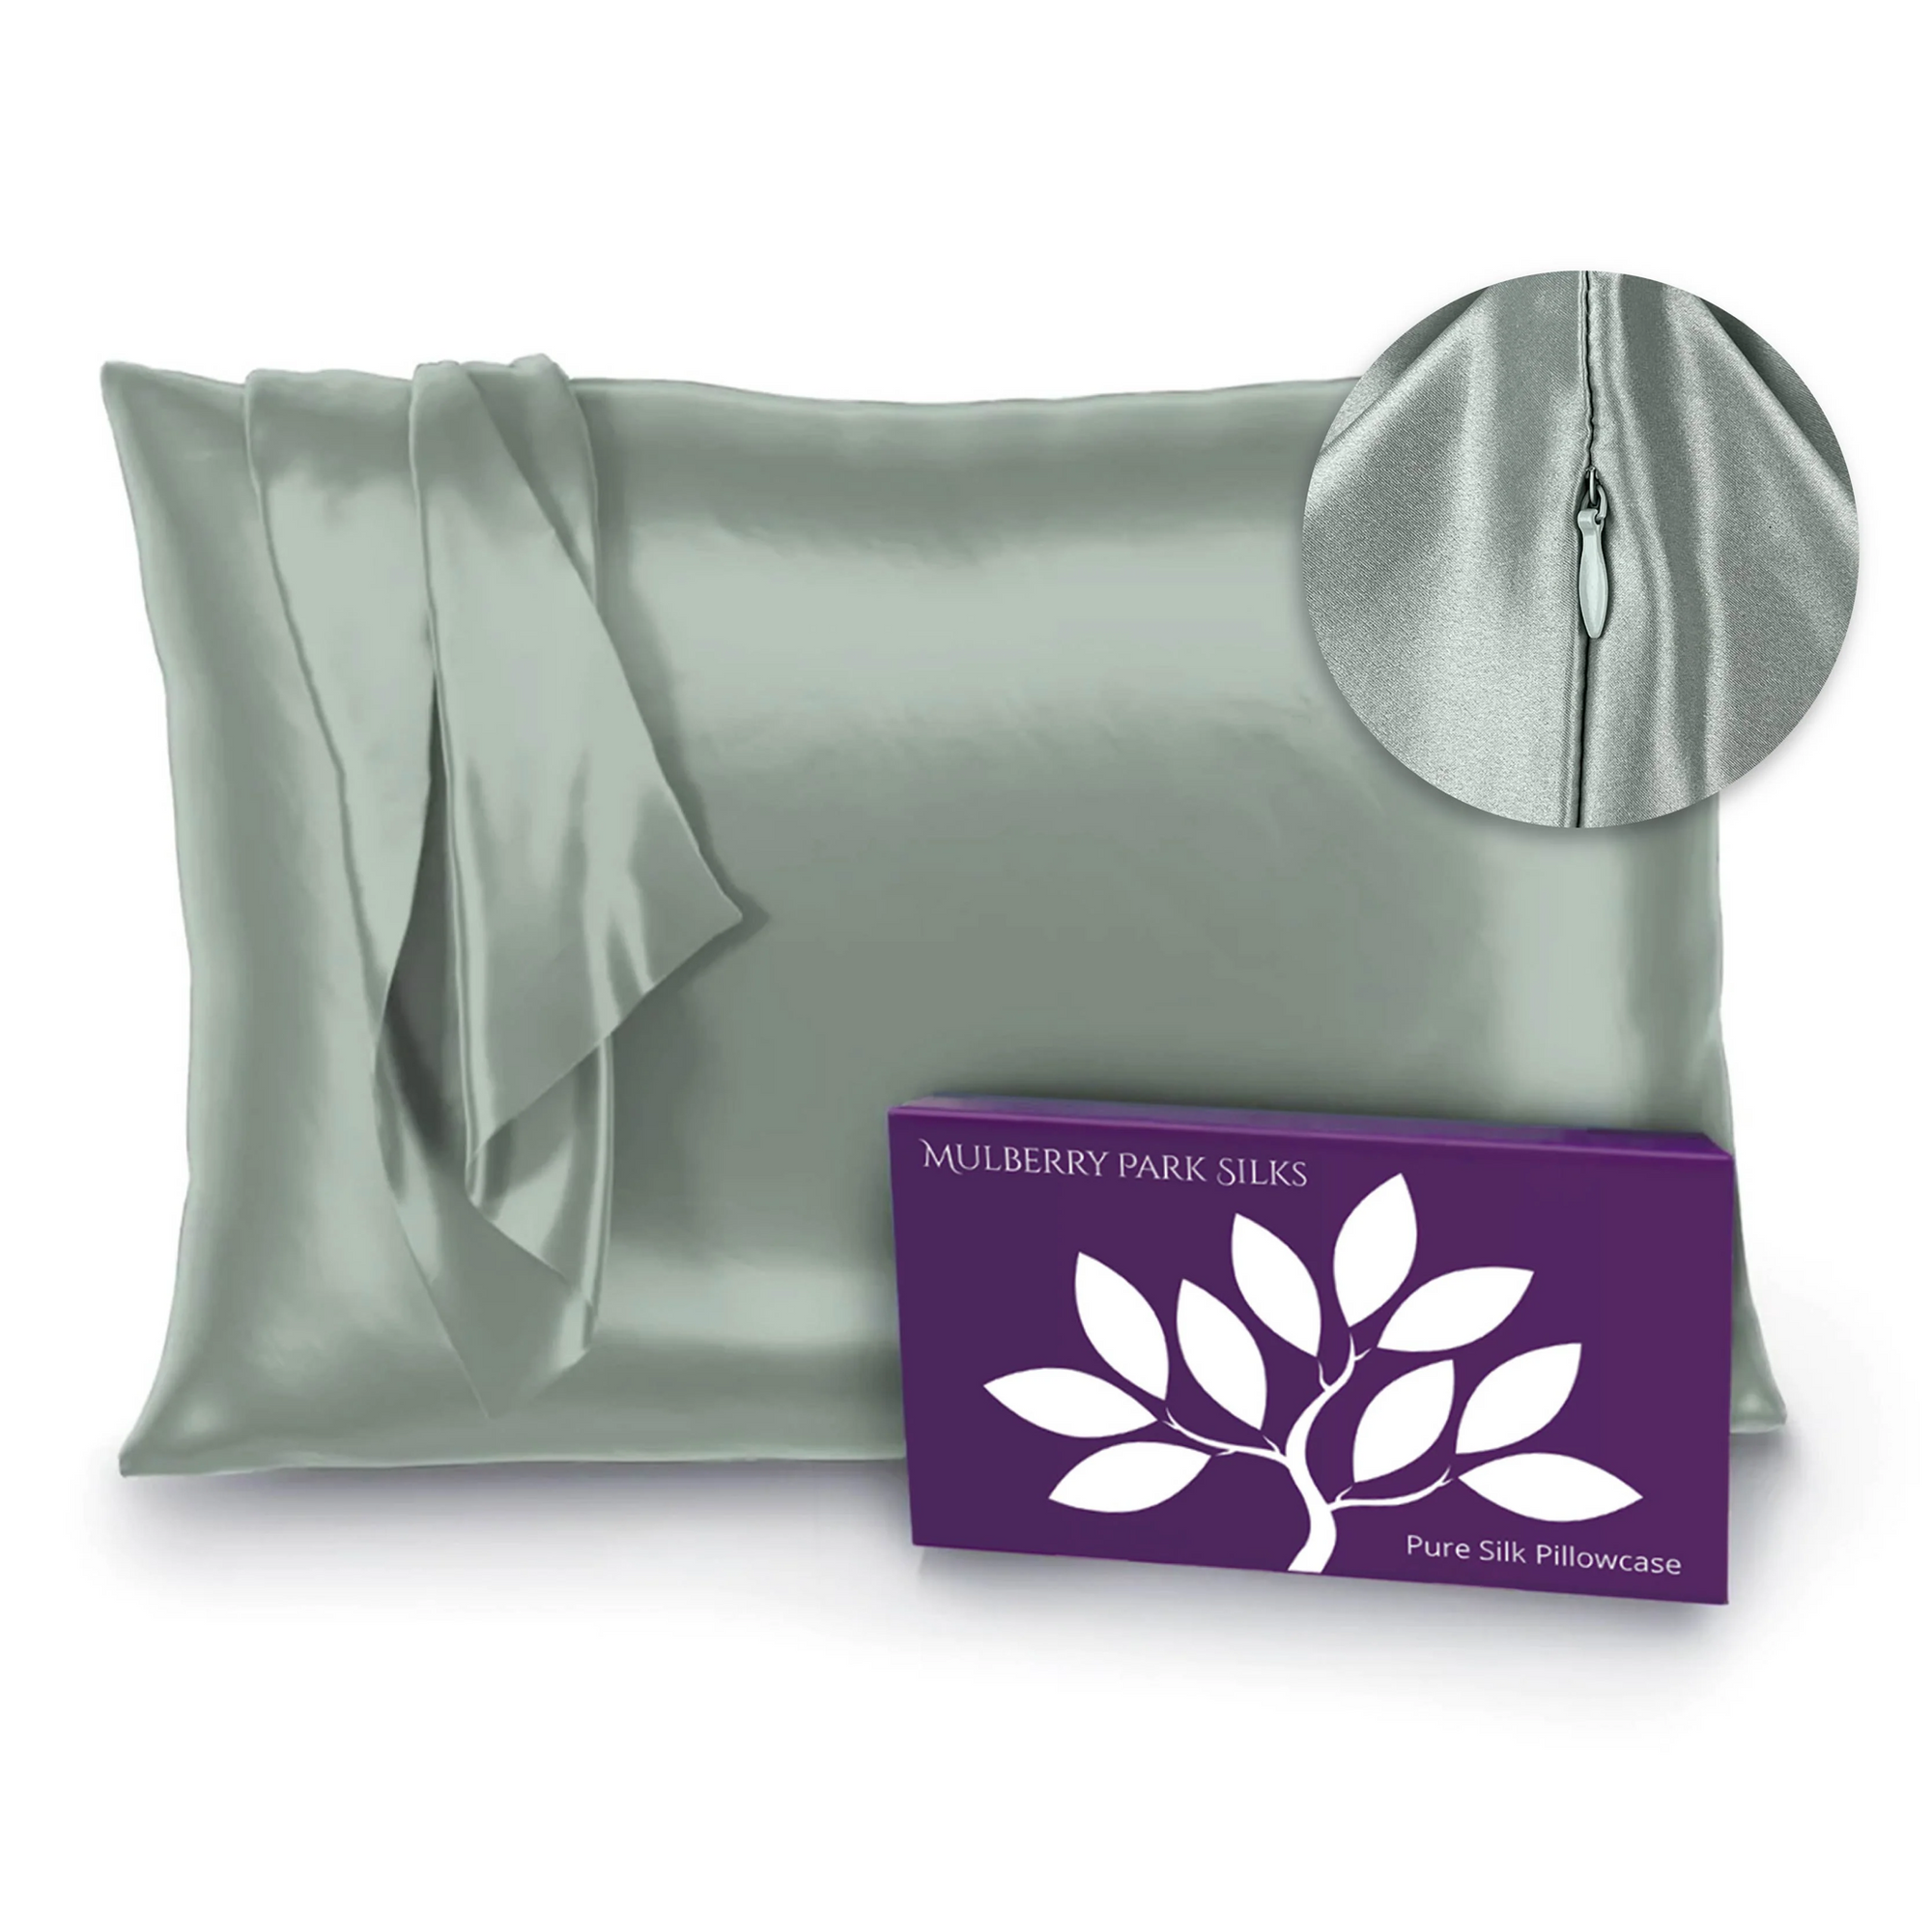 Sage Silo Image of Mulberry Park Silks Deluxe 22 Momme Pure Silk Pillowcase with Zipper Detail and Box